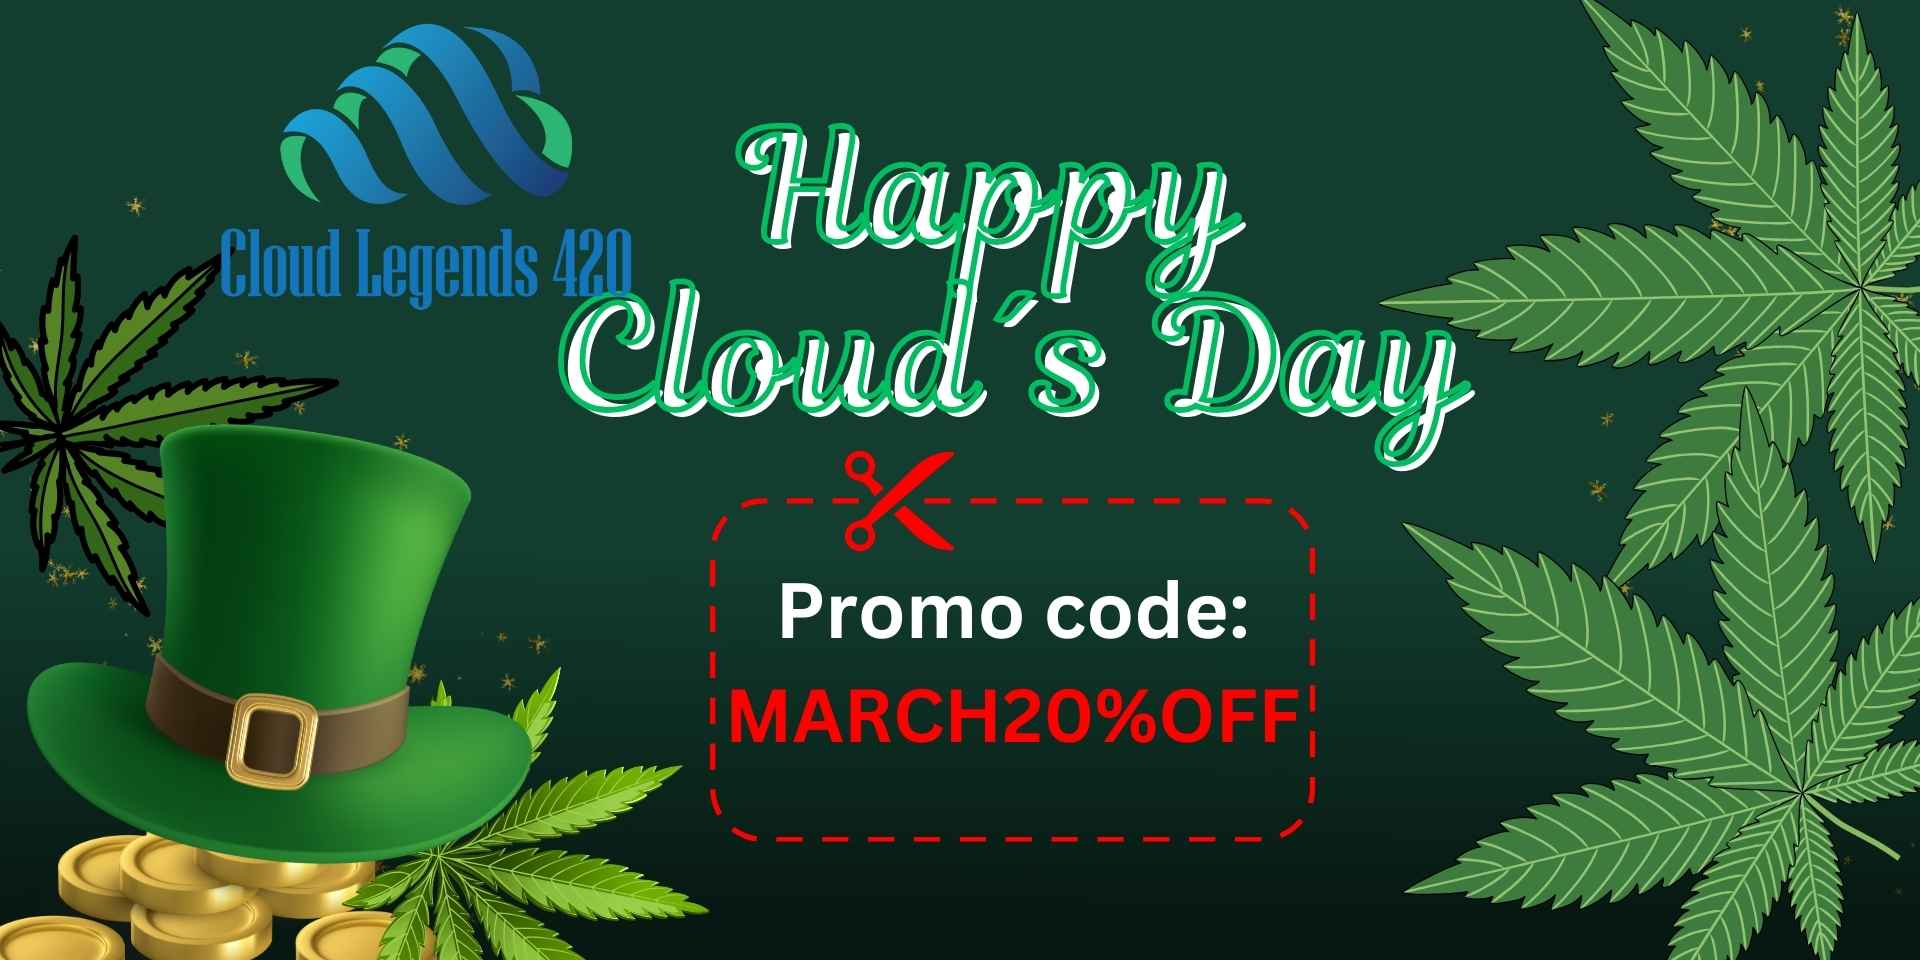 March banner 20% off promo code by Cloud Legends 420 